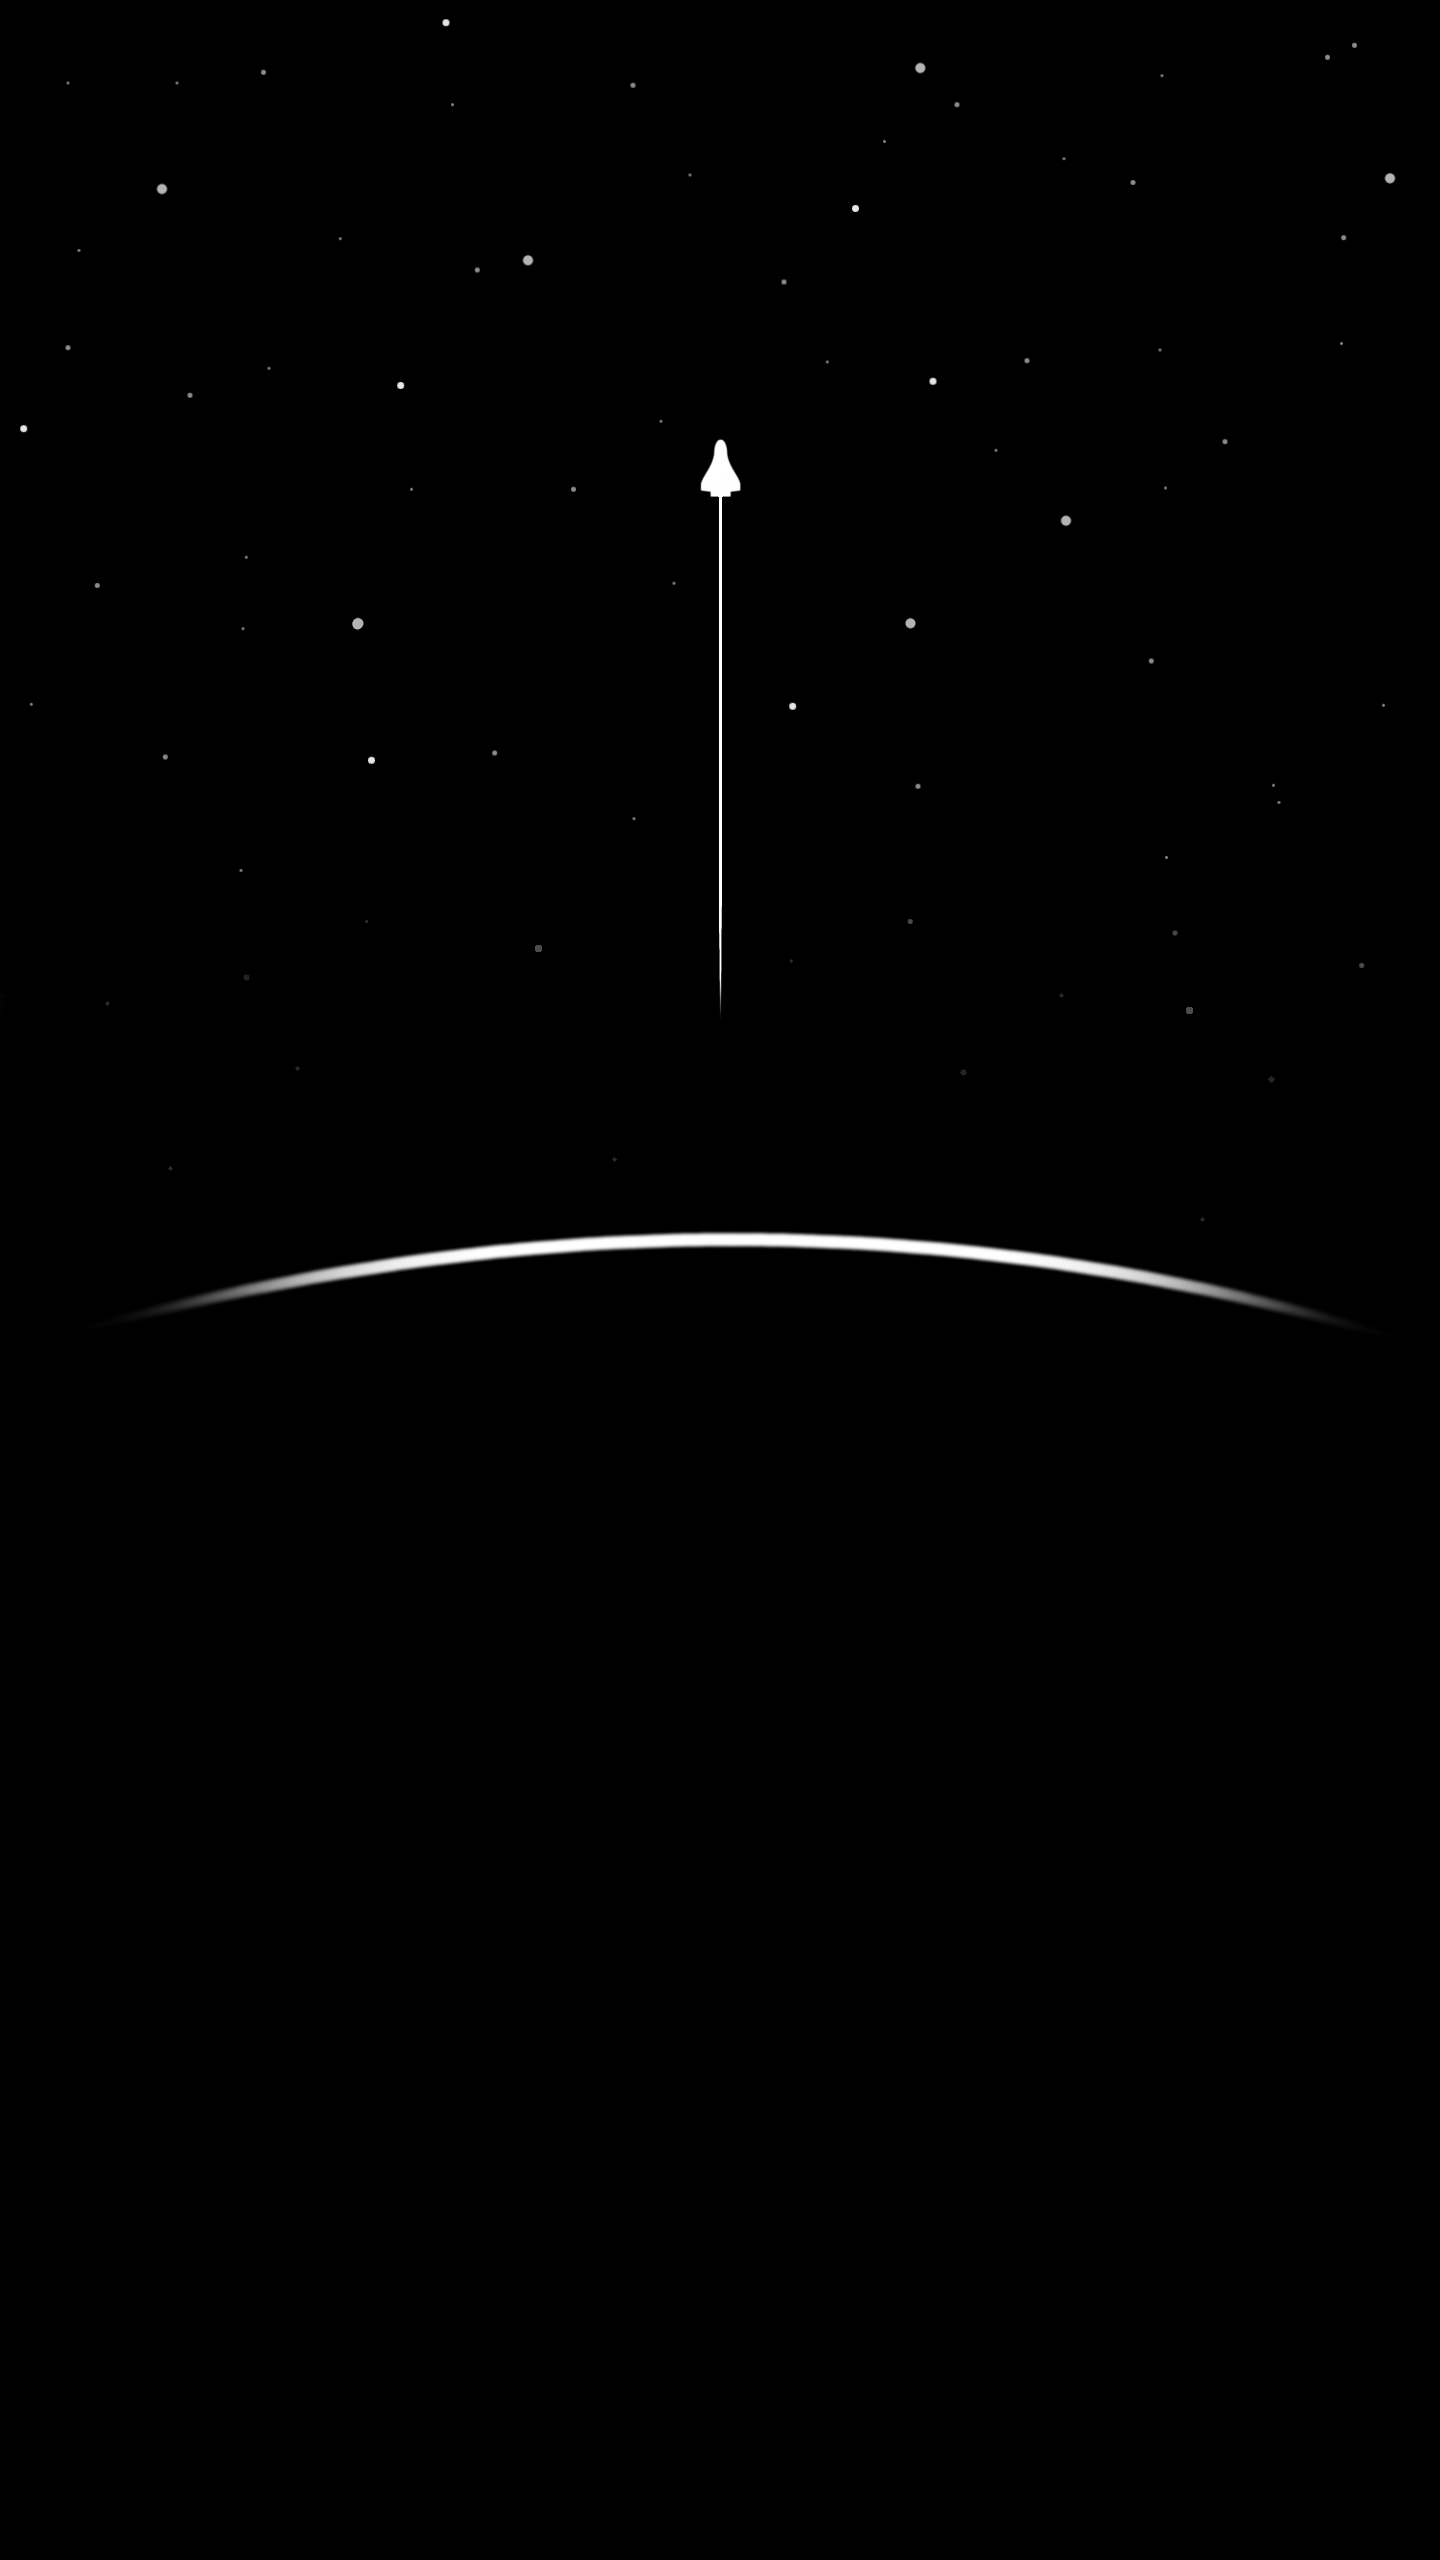 Black Amoled Wallpaper Group , Download for free. Dark black wallpaper, Black HD wallpaper, Dark background wallpaper